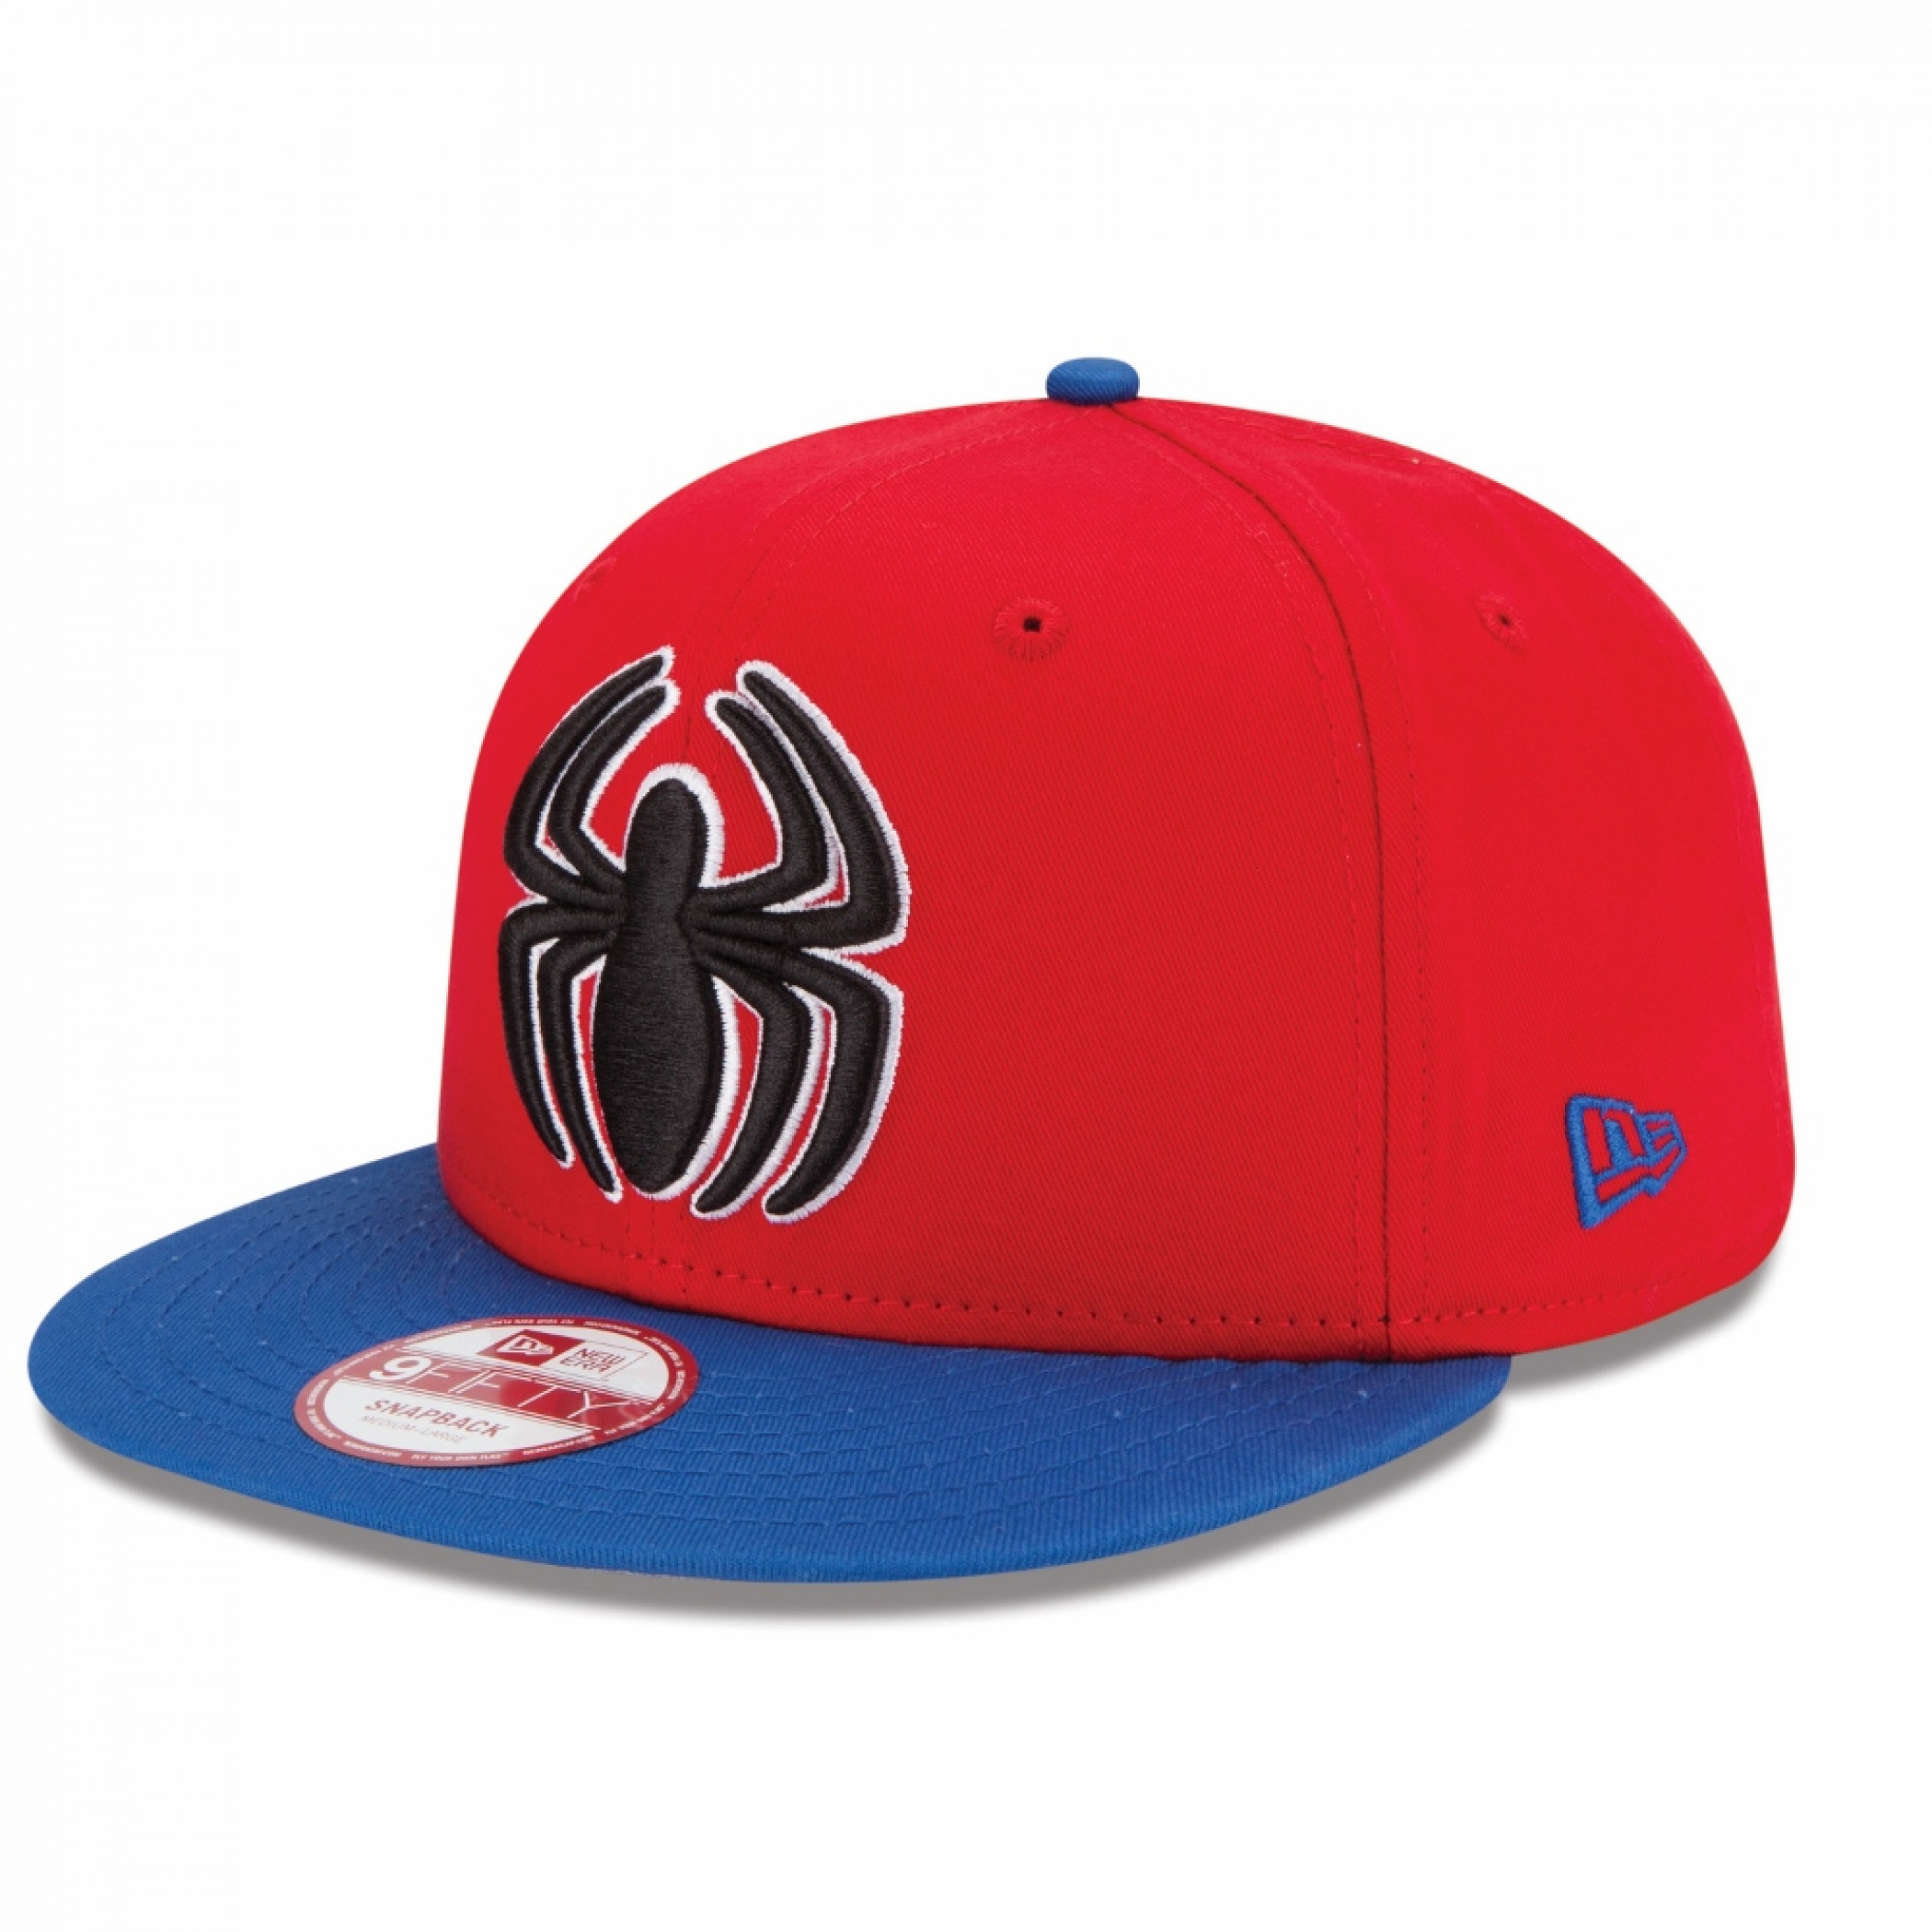 Spider-Man Symbol with "Amazing" Patch New Era 9Fifty Adjustable Hat